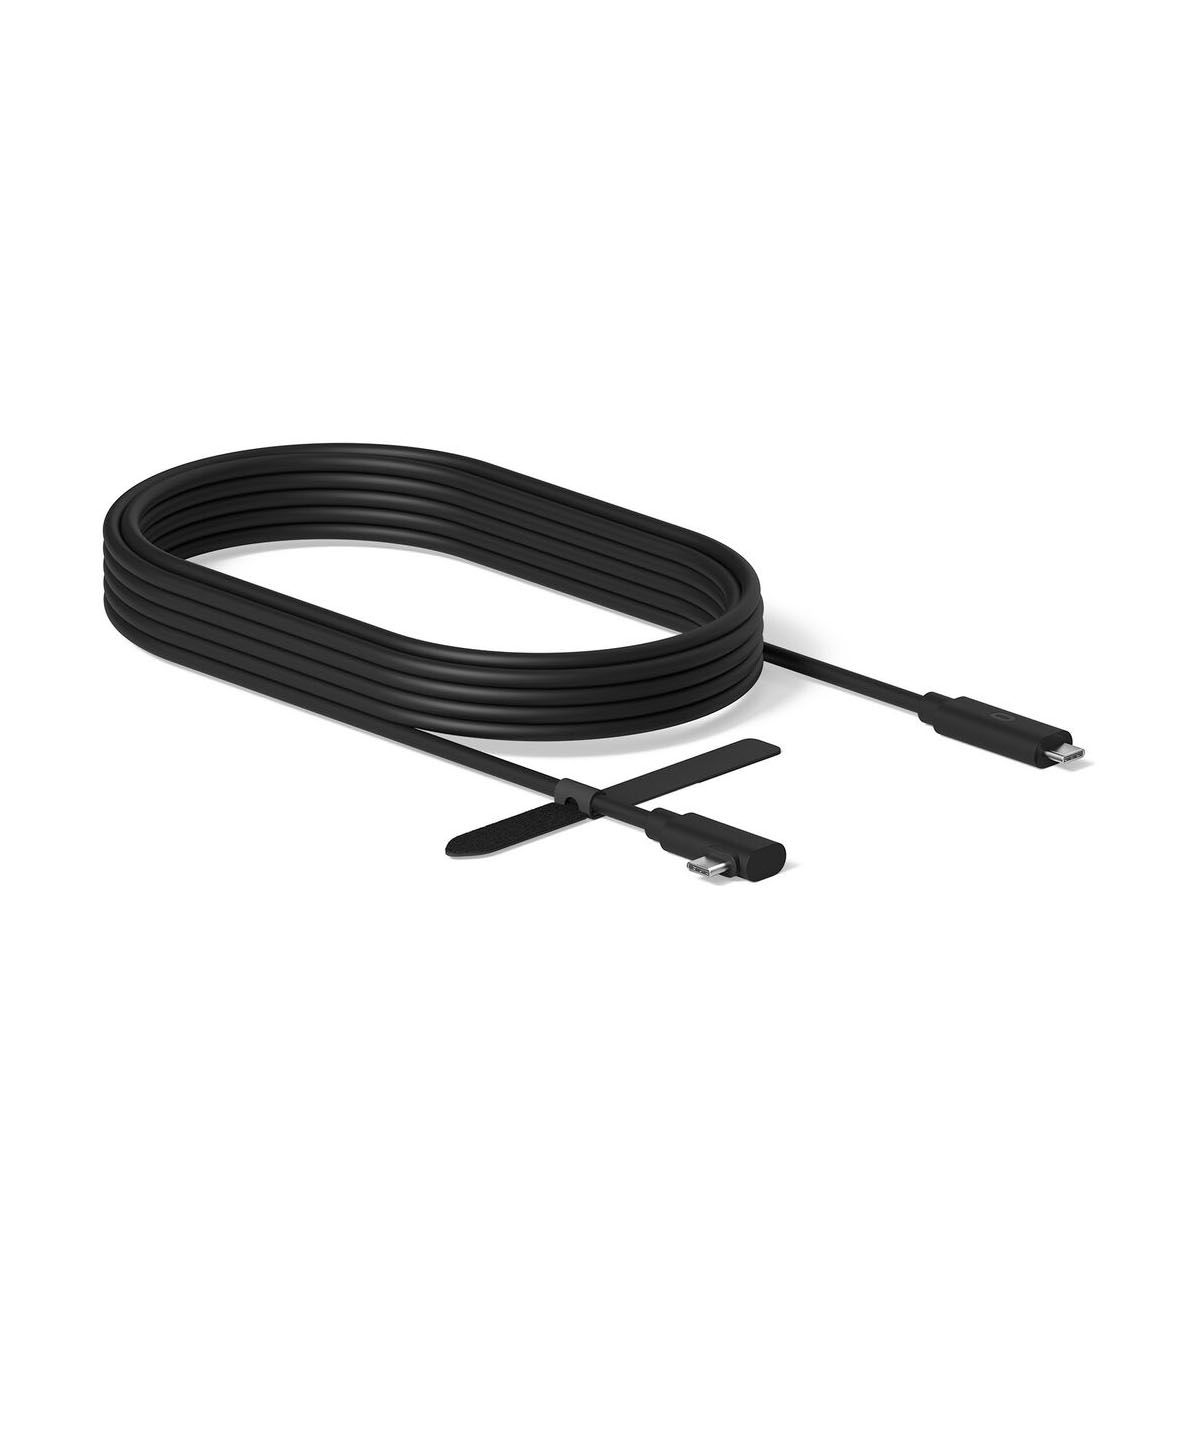 Oculus Link Cable